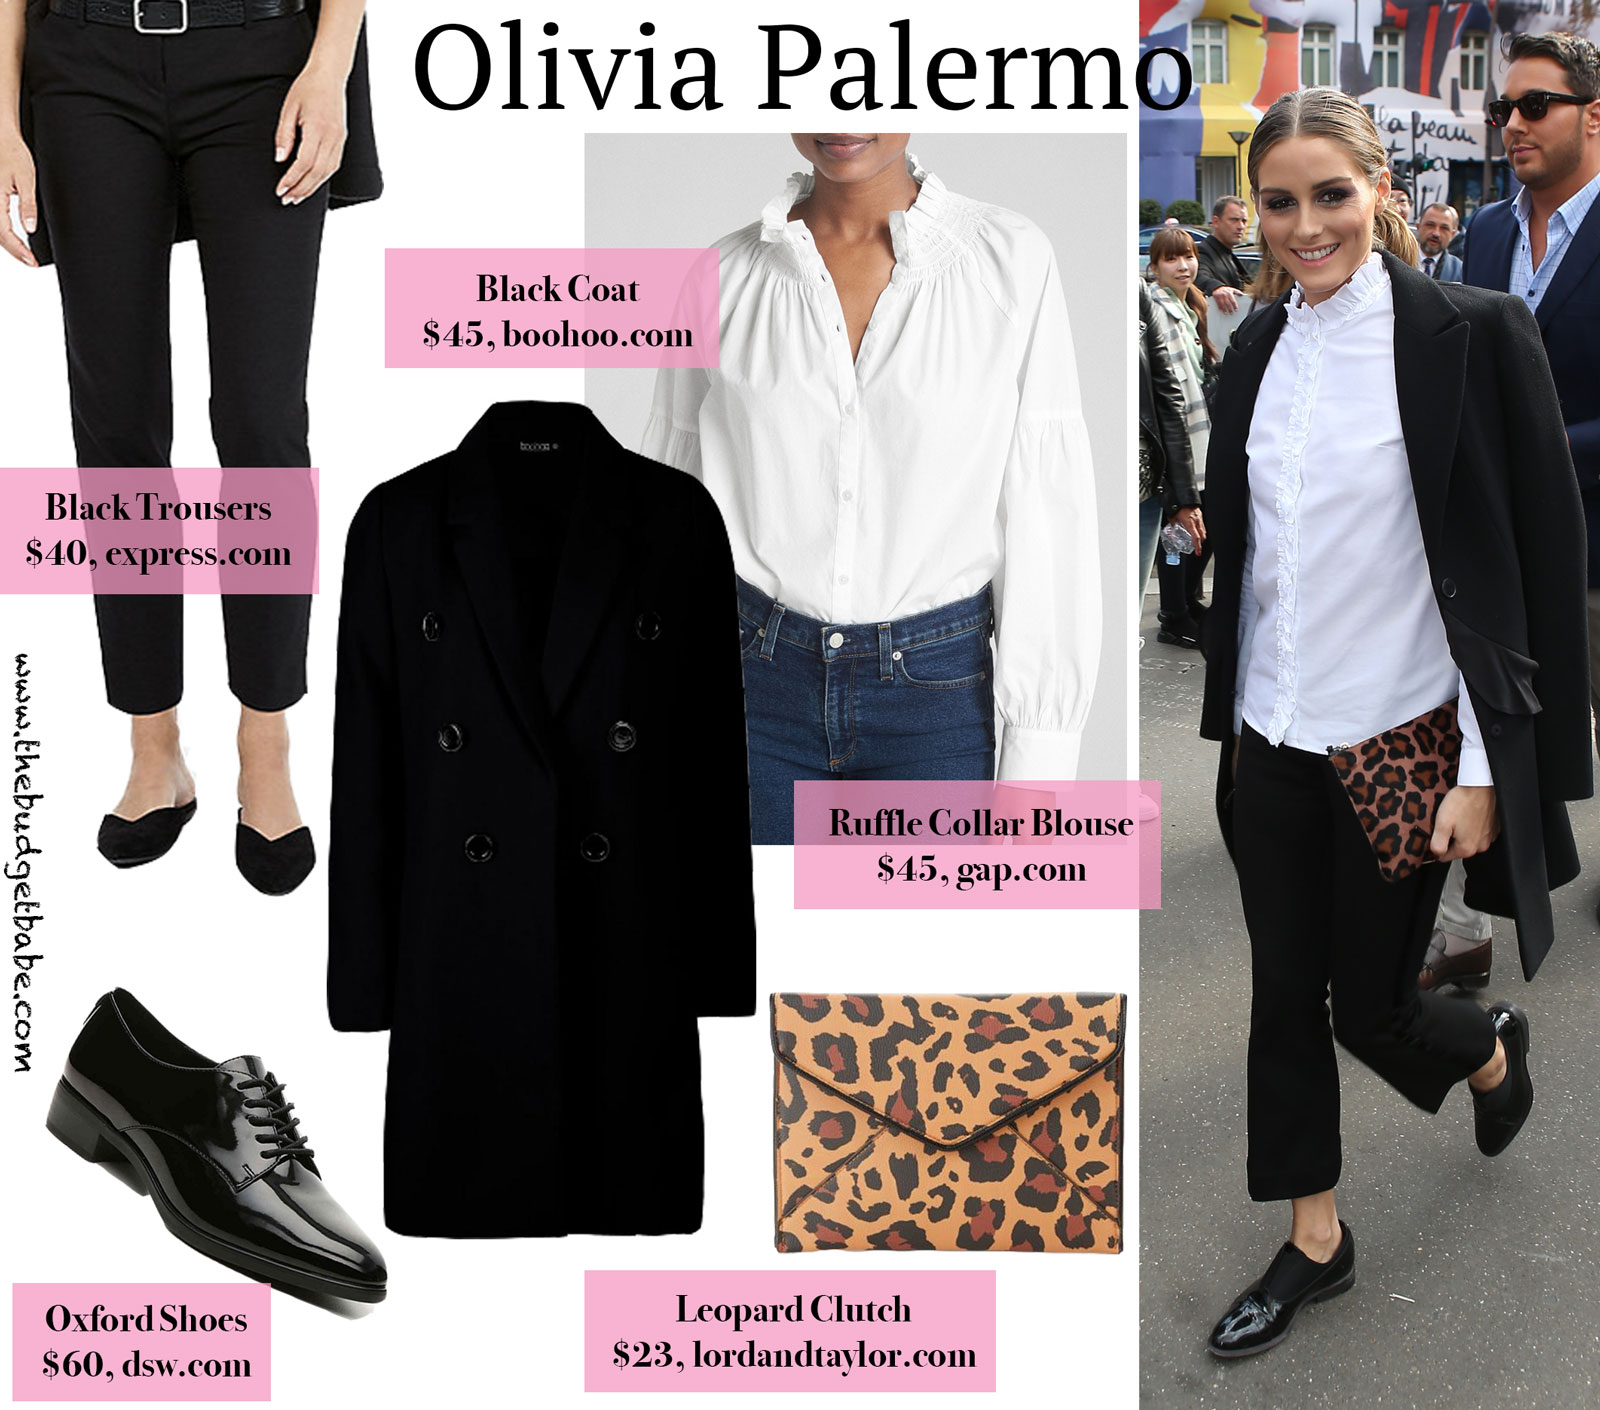 Olivia Palermo Leopard Clutch, Oxfords and White Blouse Look for Less